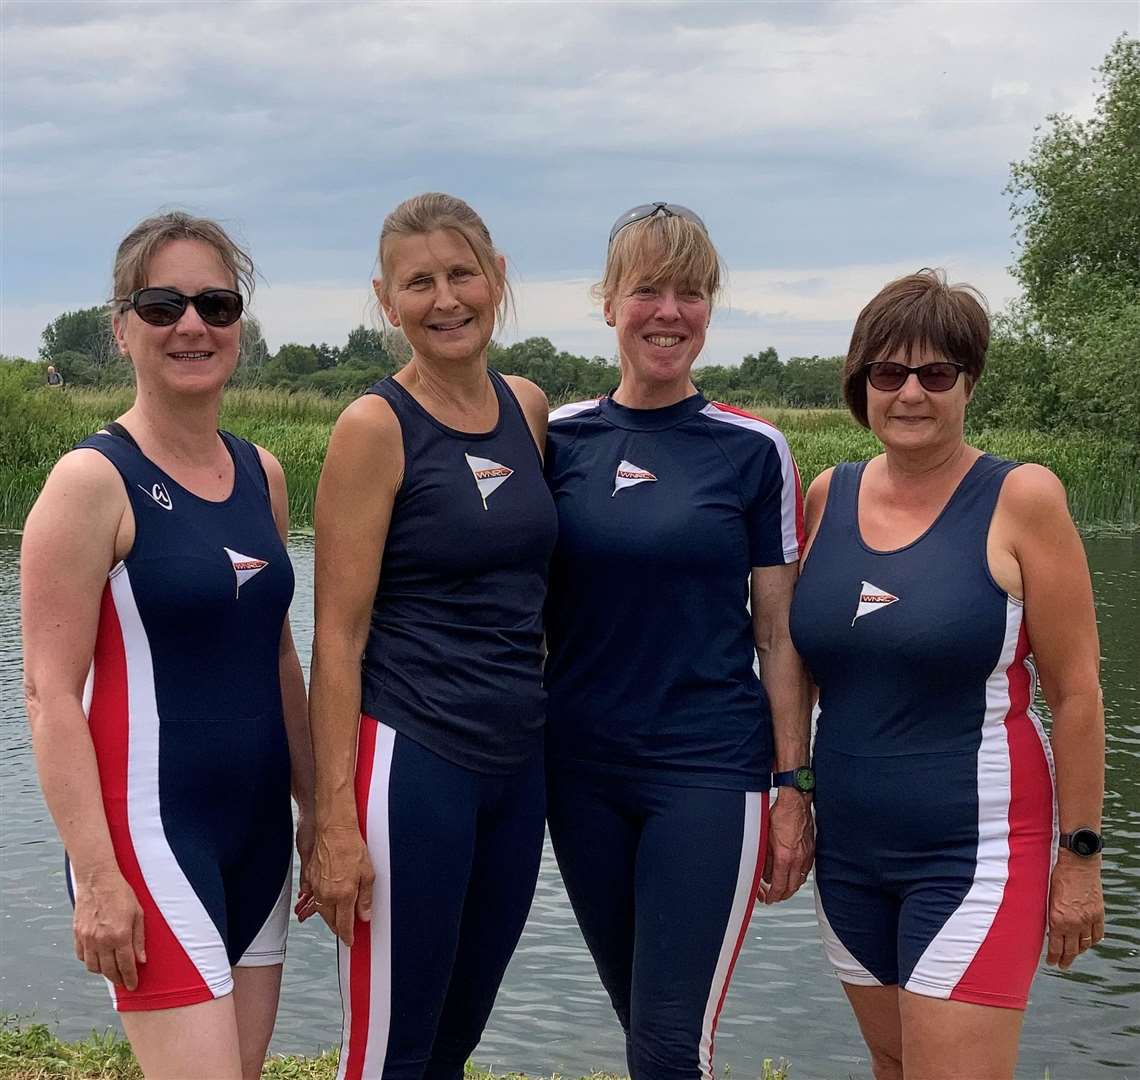 West Norfolk Rowing Club's women's masters E coxless quad crew of Nix Marston, Helen Pryer, Liz Palmer and Angela Holford